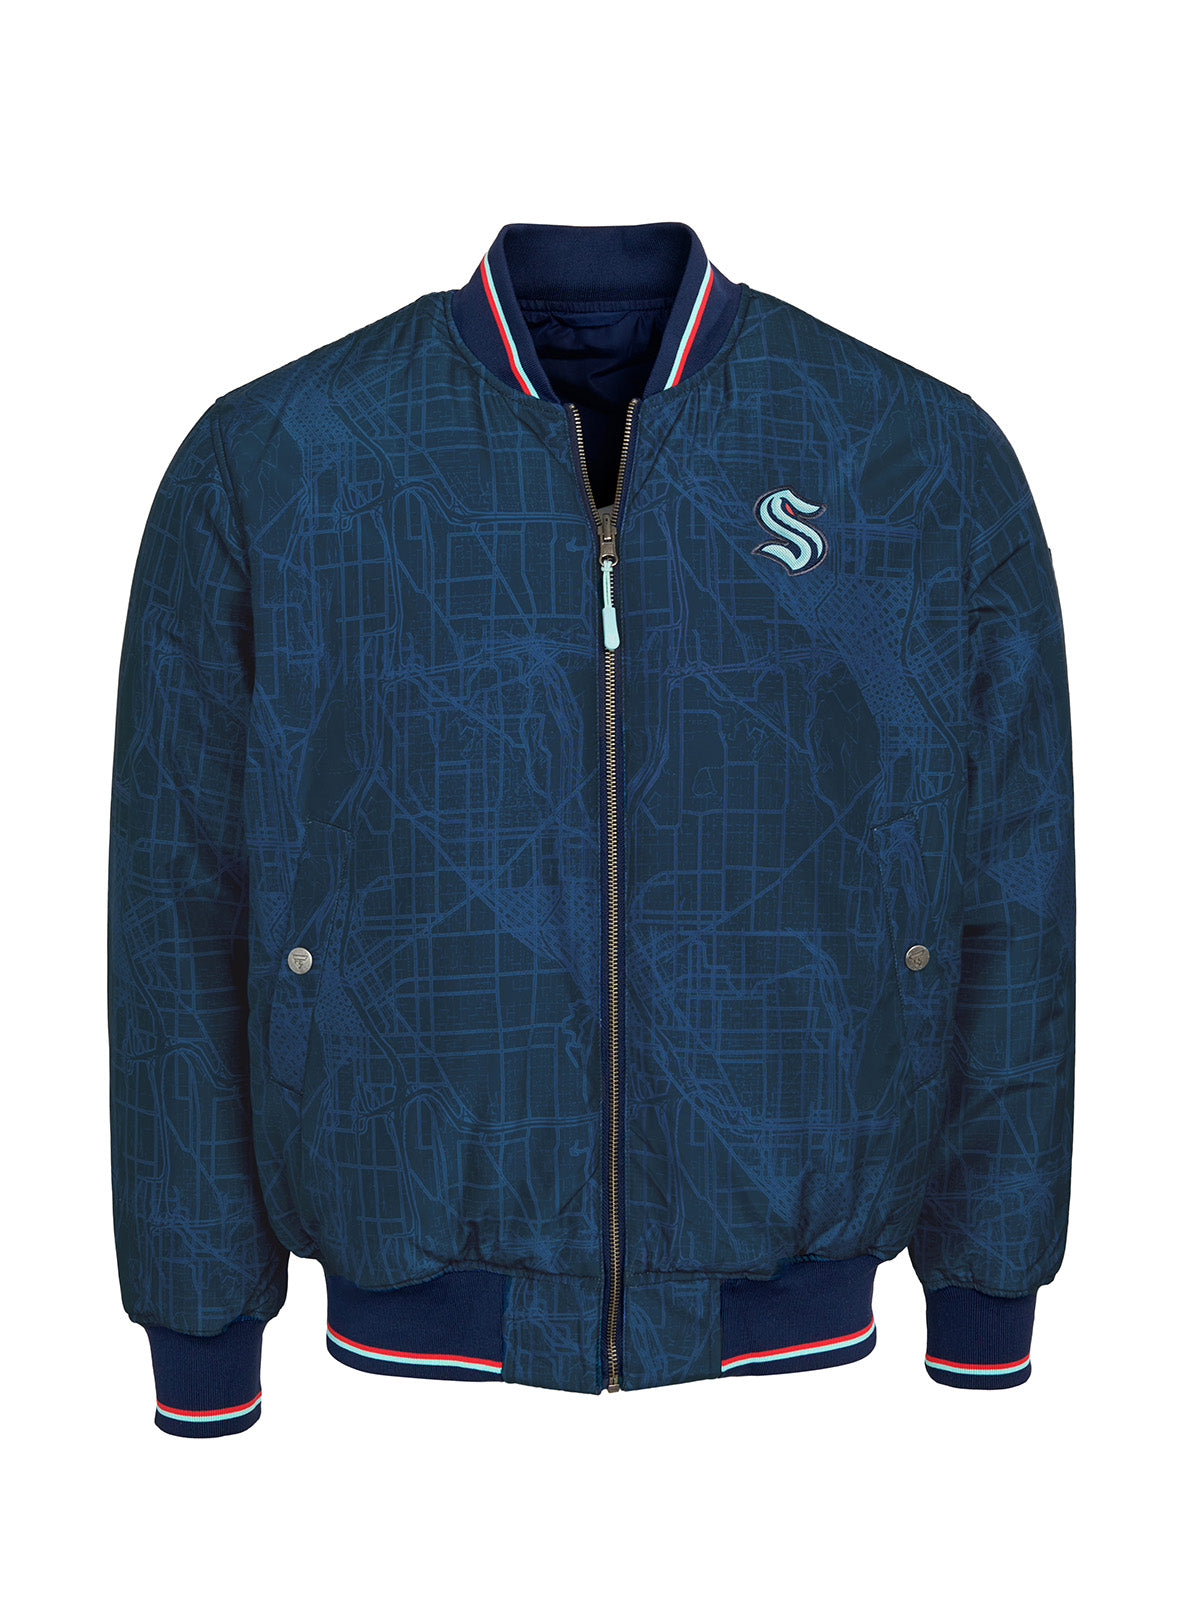 Seattle Kraken Bomber - Reversible bomber jacket featuring the iconic Seattle Kraken logo with ribbed cuffs, collar and hem in the team colors